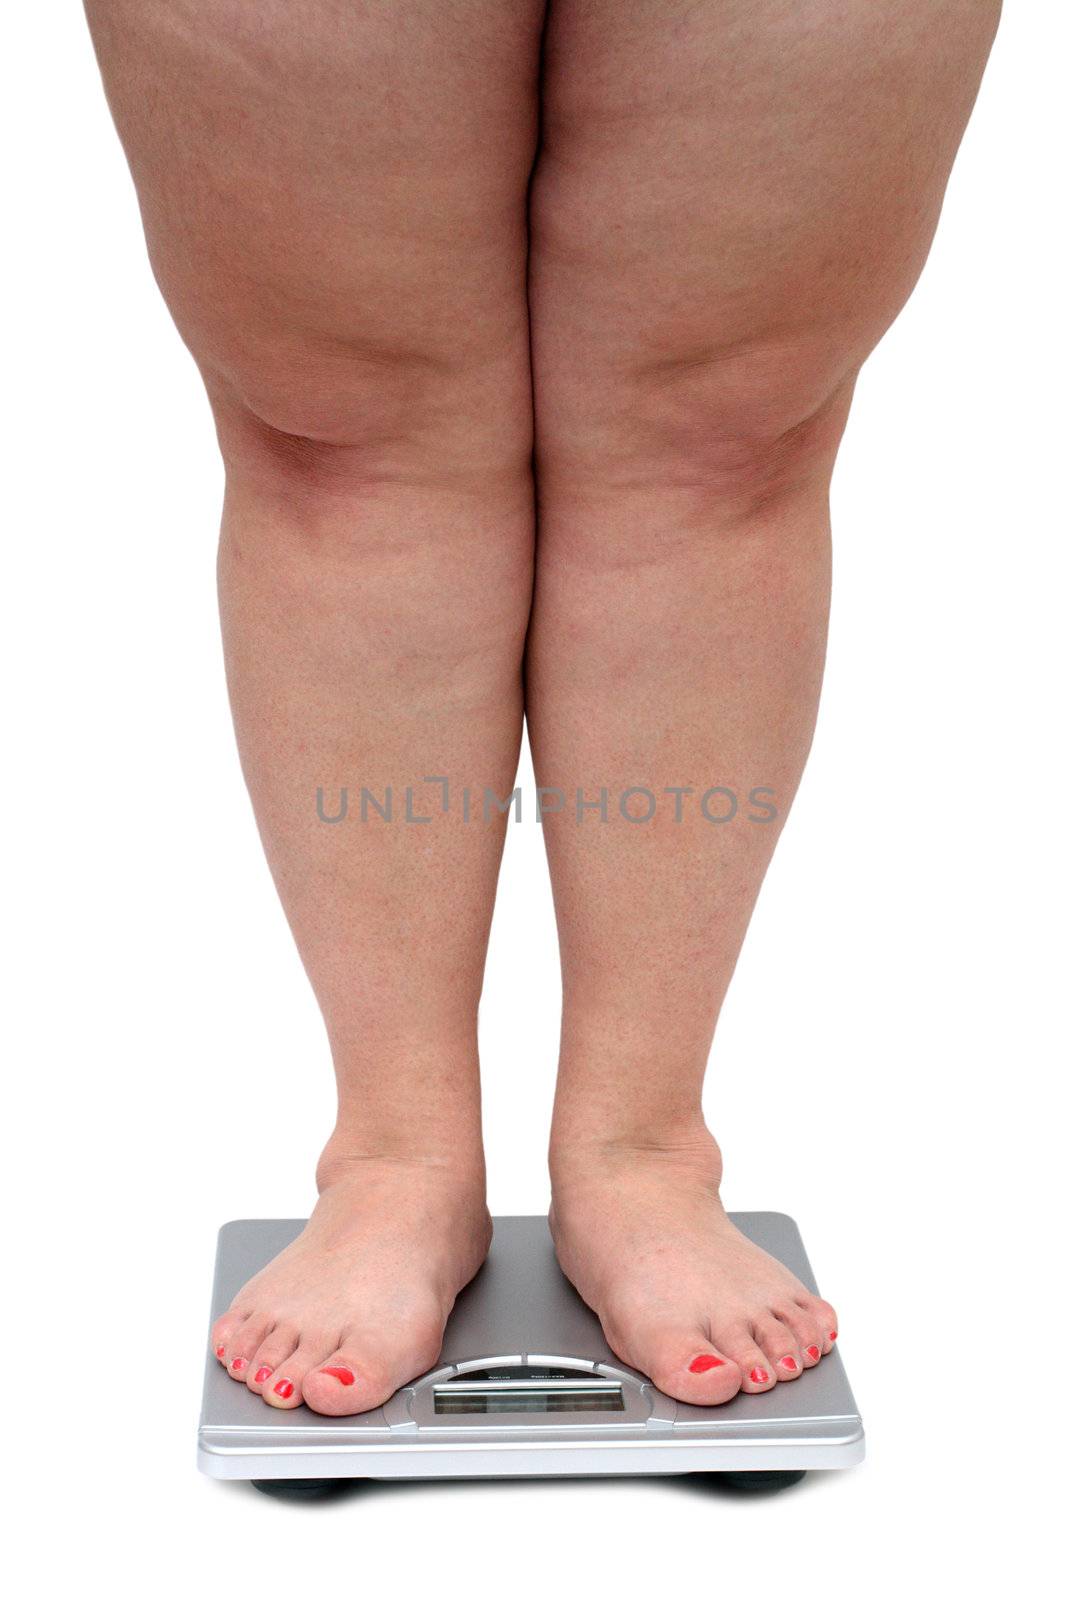 women legs with overweight by Mikko